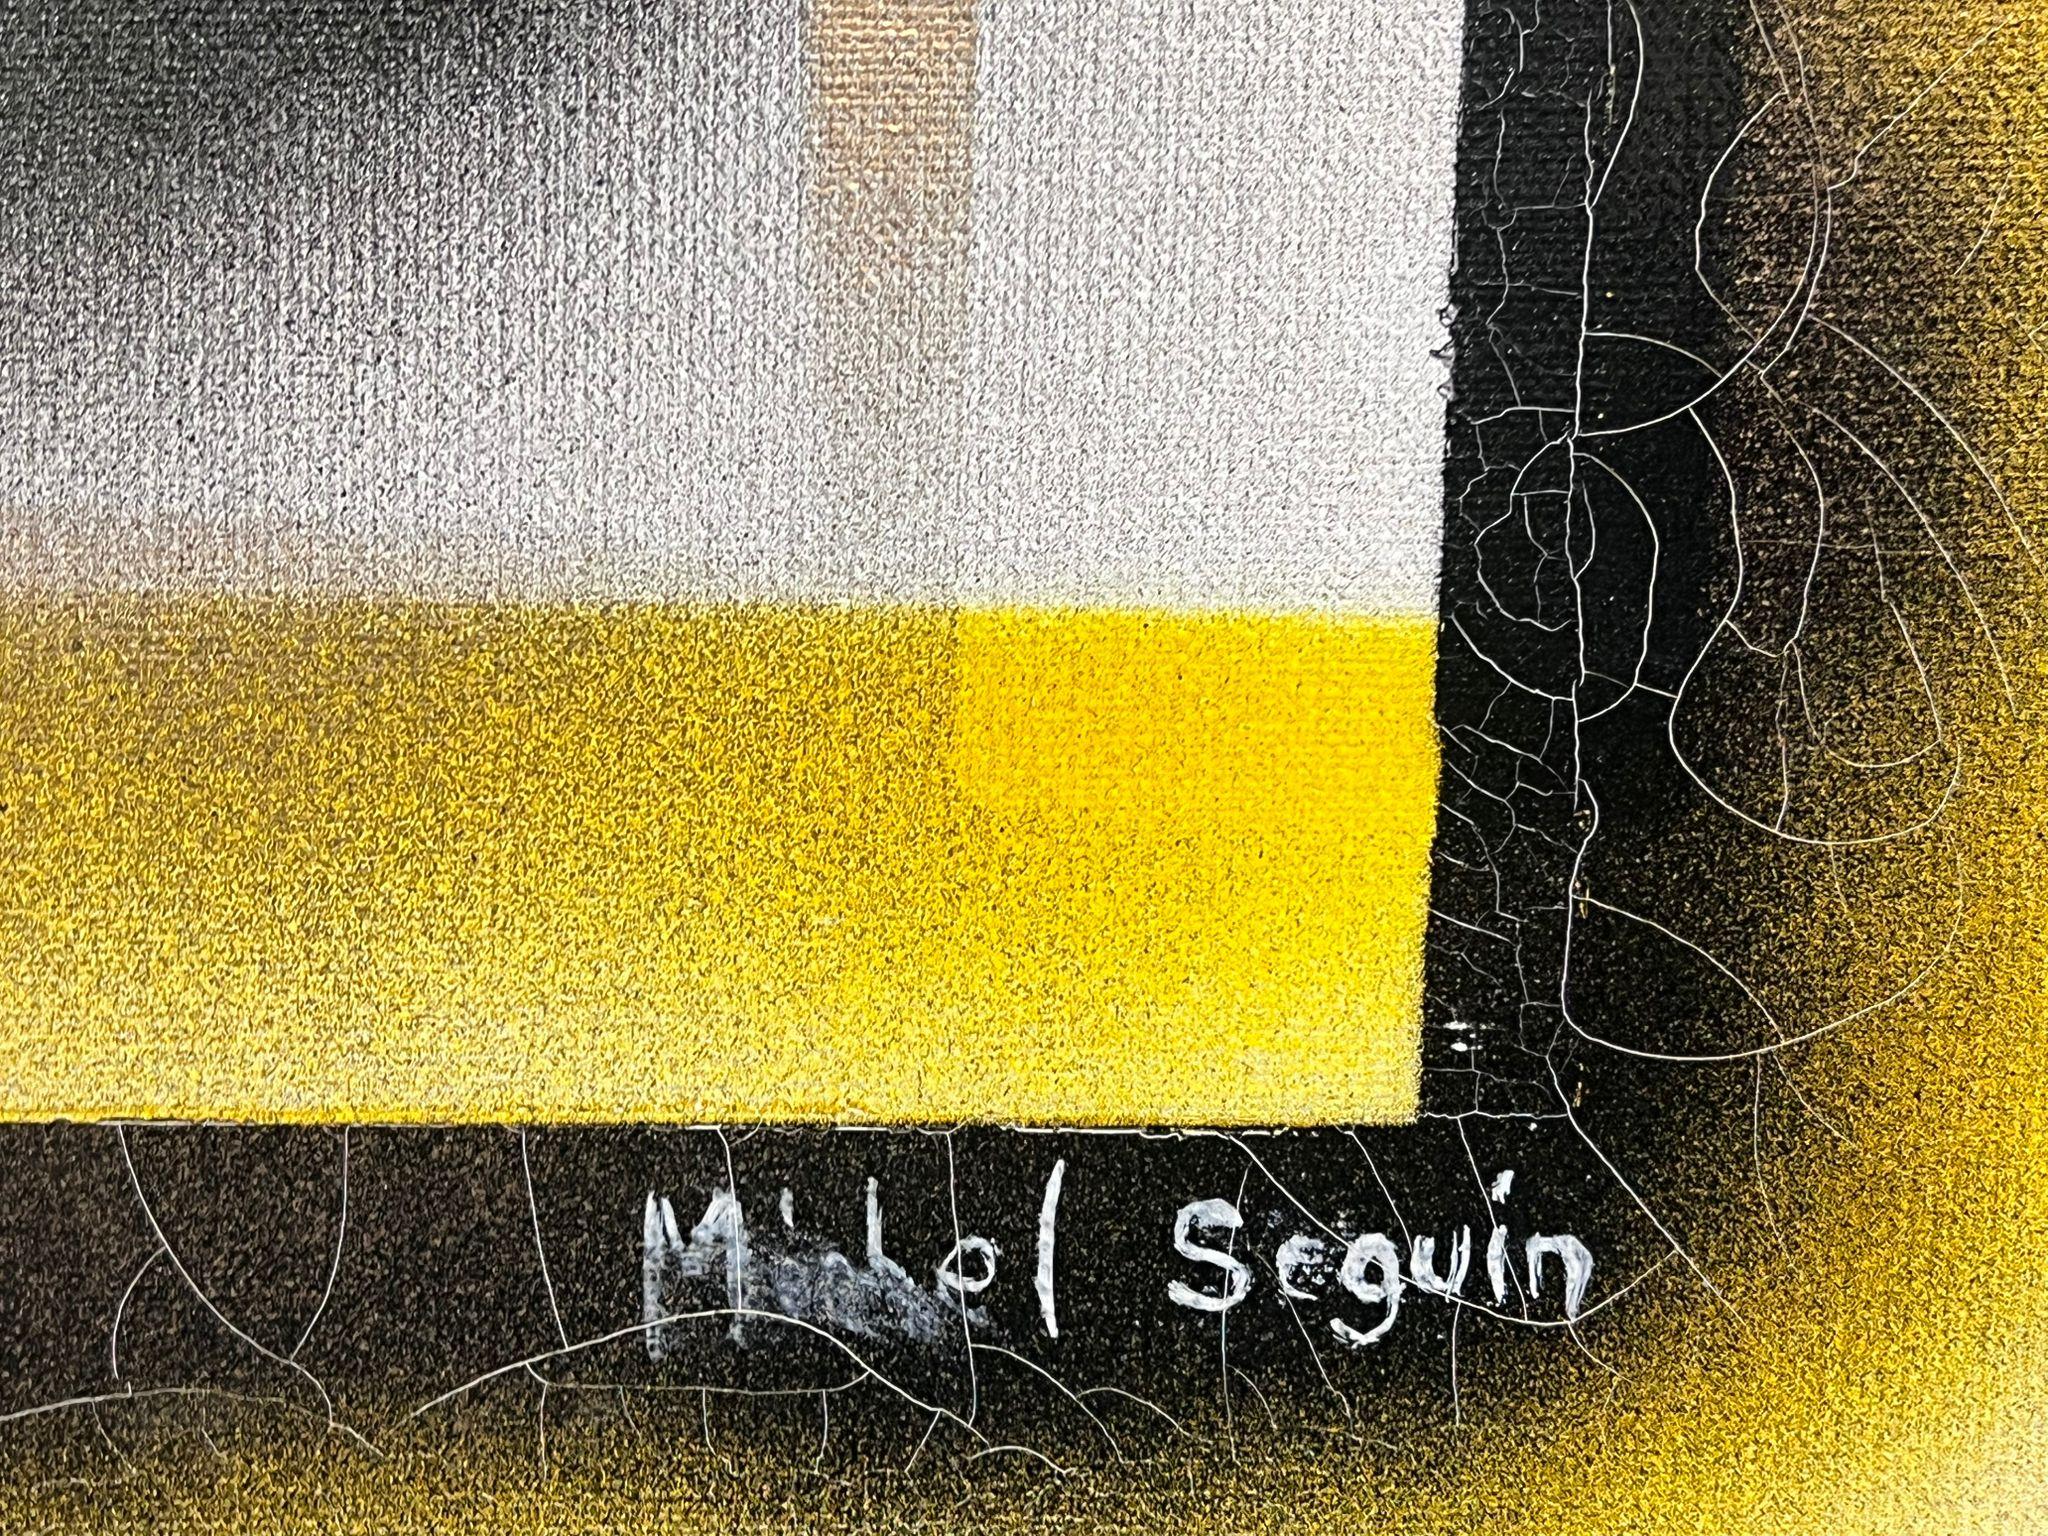 Abstract Composition
by Michel Seguin (French contemporary)
signed, paint on canvas, unframed
canvas: 18 x 24 inches
provenance: private collection, Paris
condition: very good and sound condition